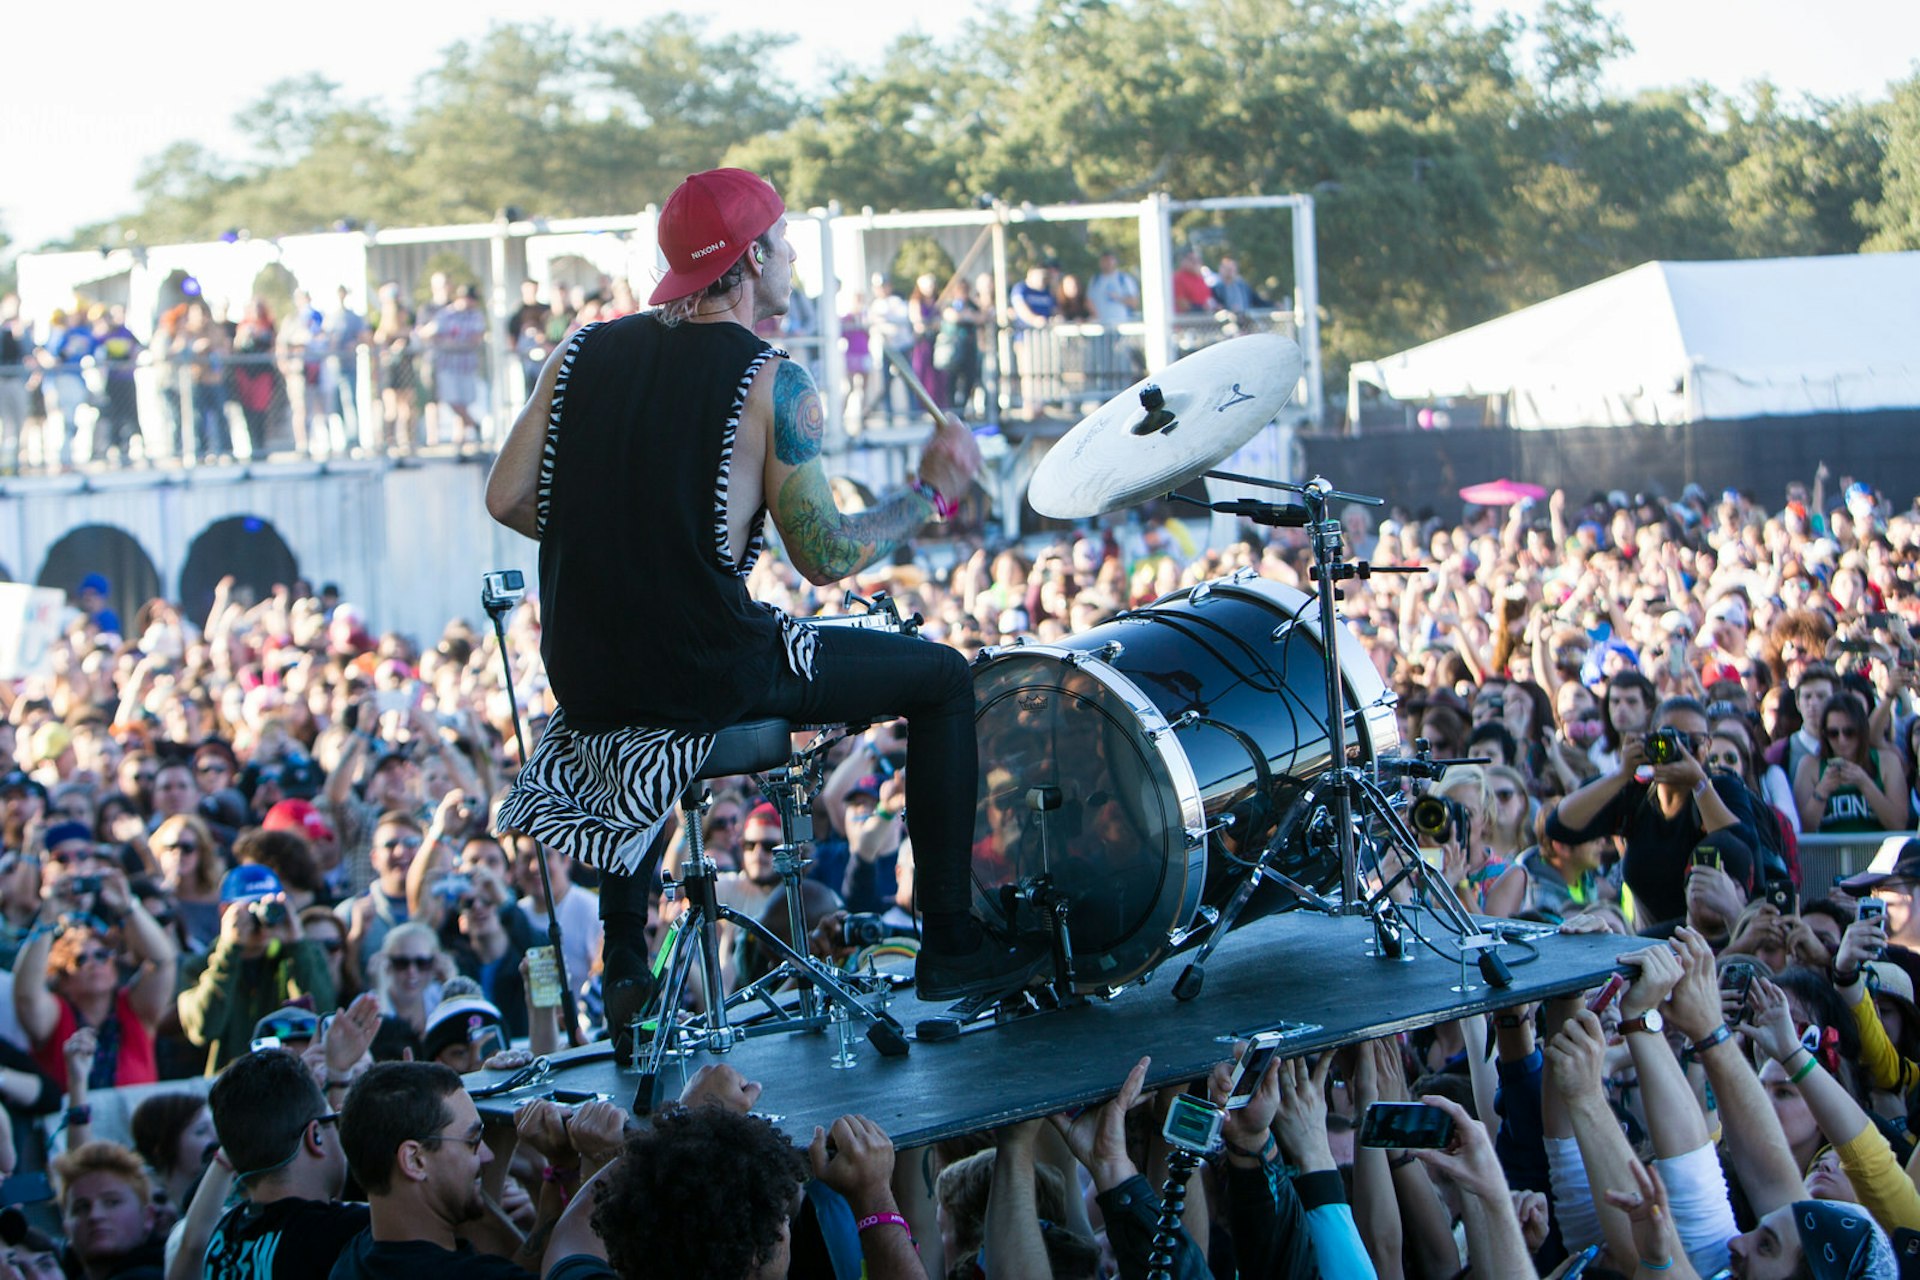 NEW ORLEANS, LA - OCTOBER 31: Josh Dun of Twenty One Pilots performs in the crowd during the 2014 Voodoo Music + Arts Experience at New Orleans City Park on October 31, 2014 in New Orleans, Louisiana. (Photo by Josh Brasted/FilmMagic)